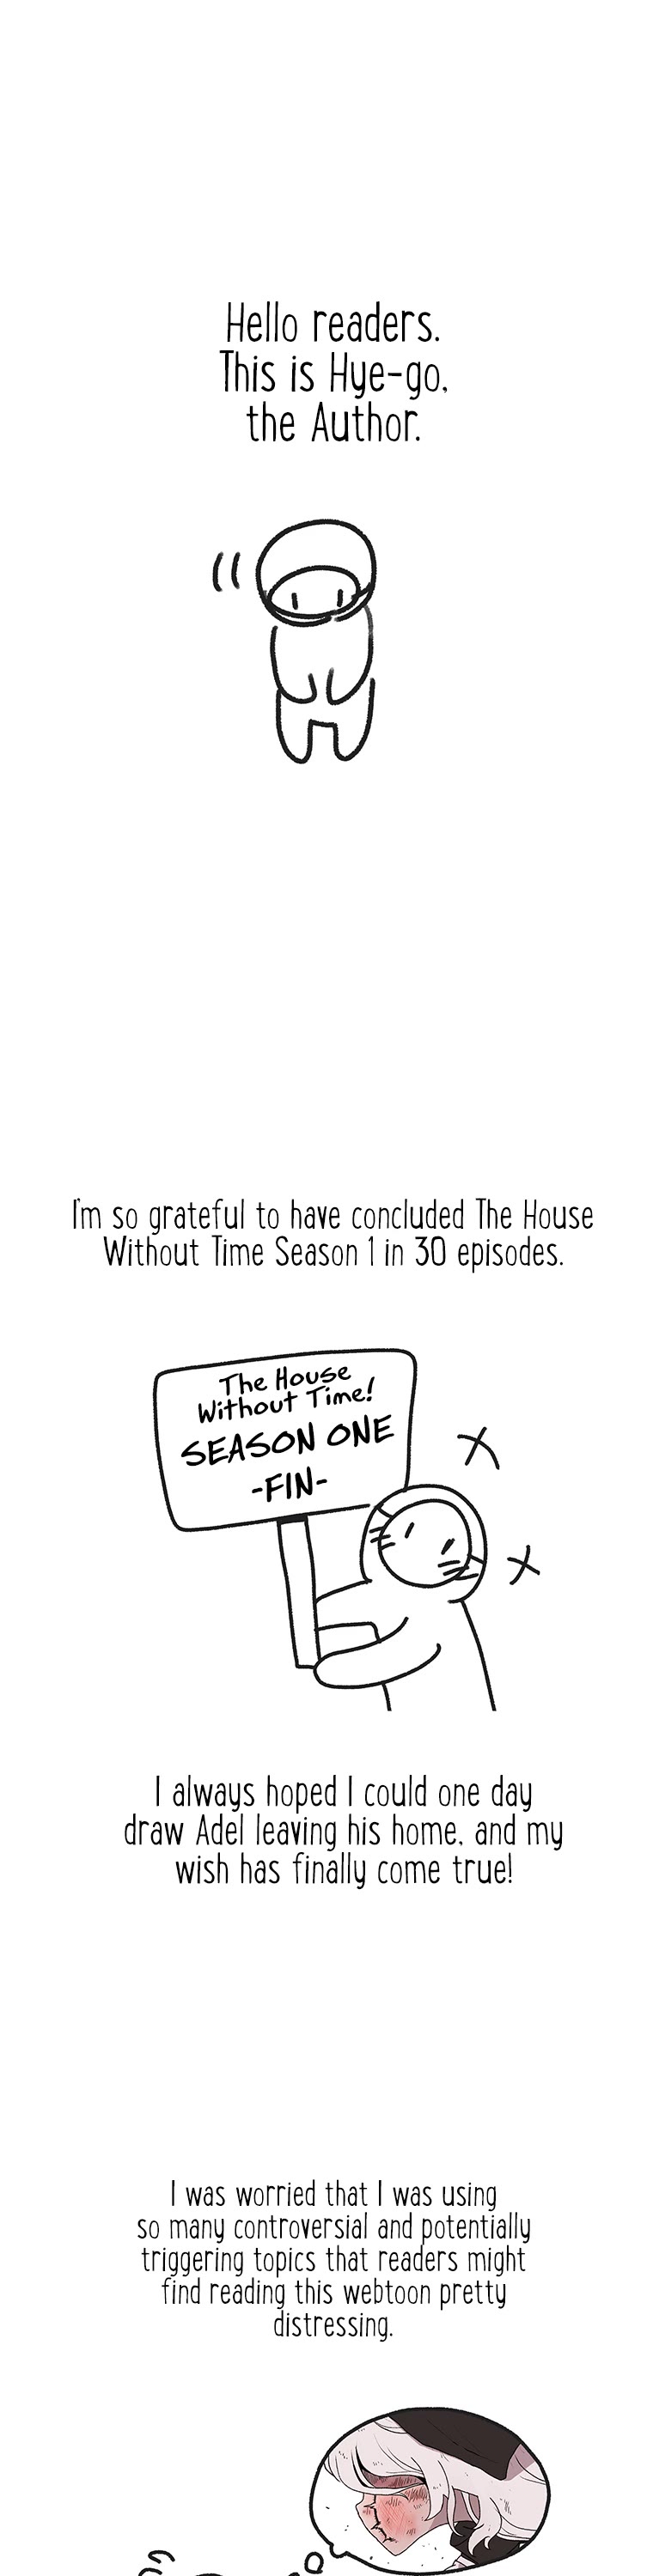 The House Without Time Chapter 30.5: Season 1 - End [Authors Notes] - Picture 1